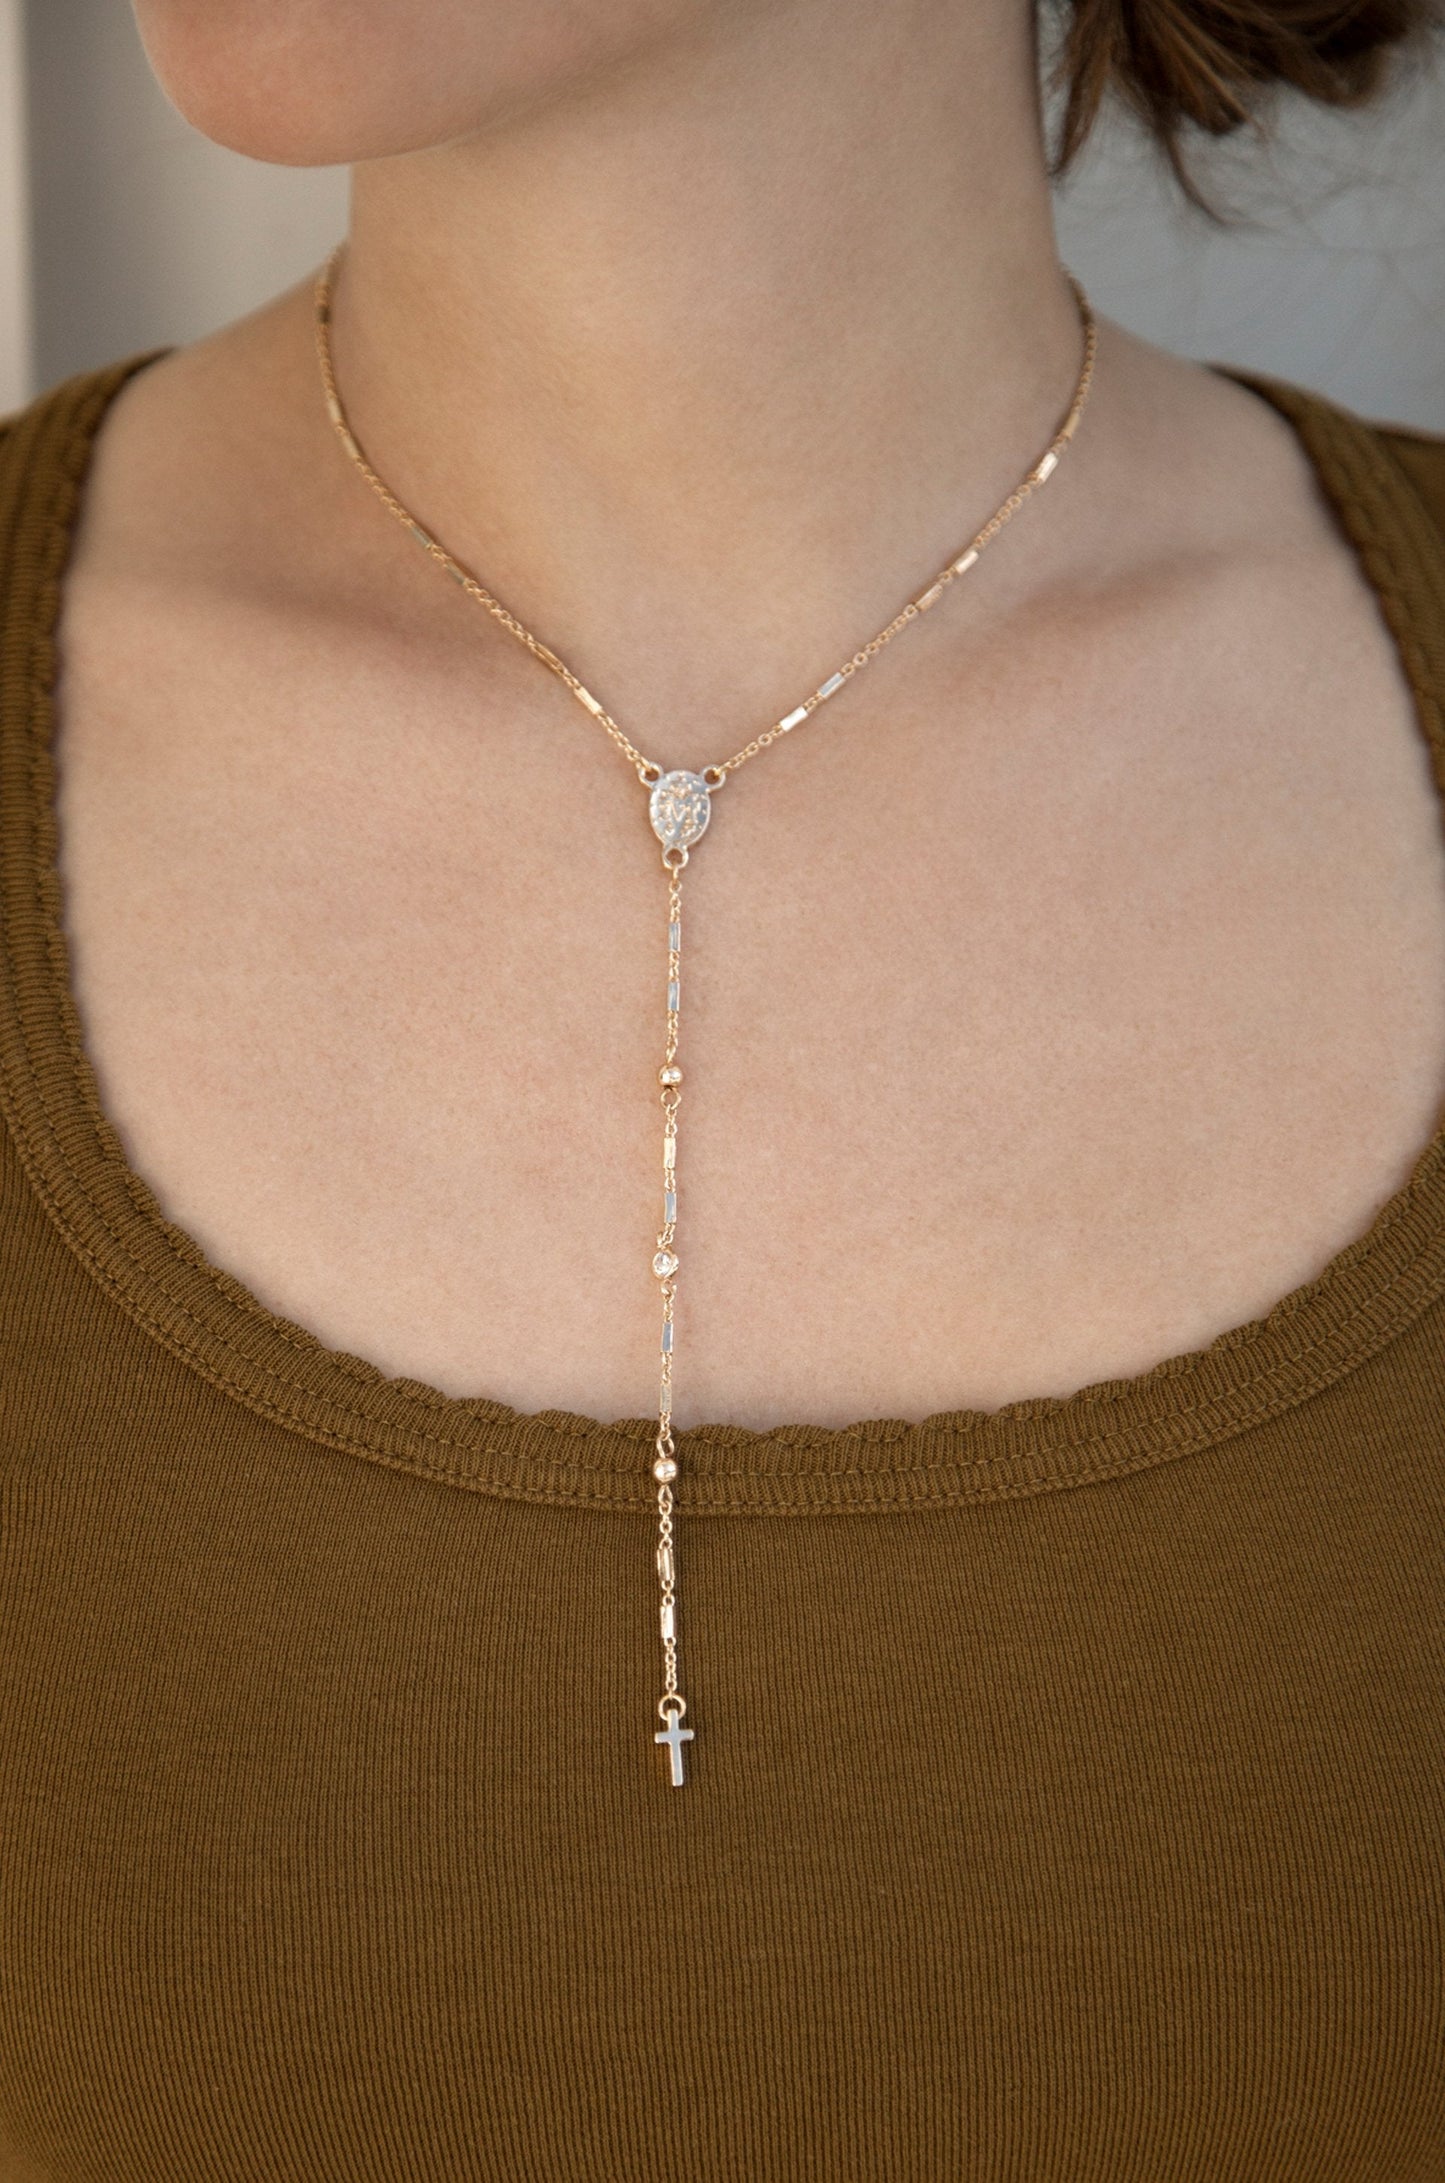 Cross Y 18k Gold Plated Necklace on model